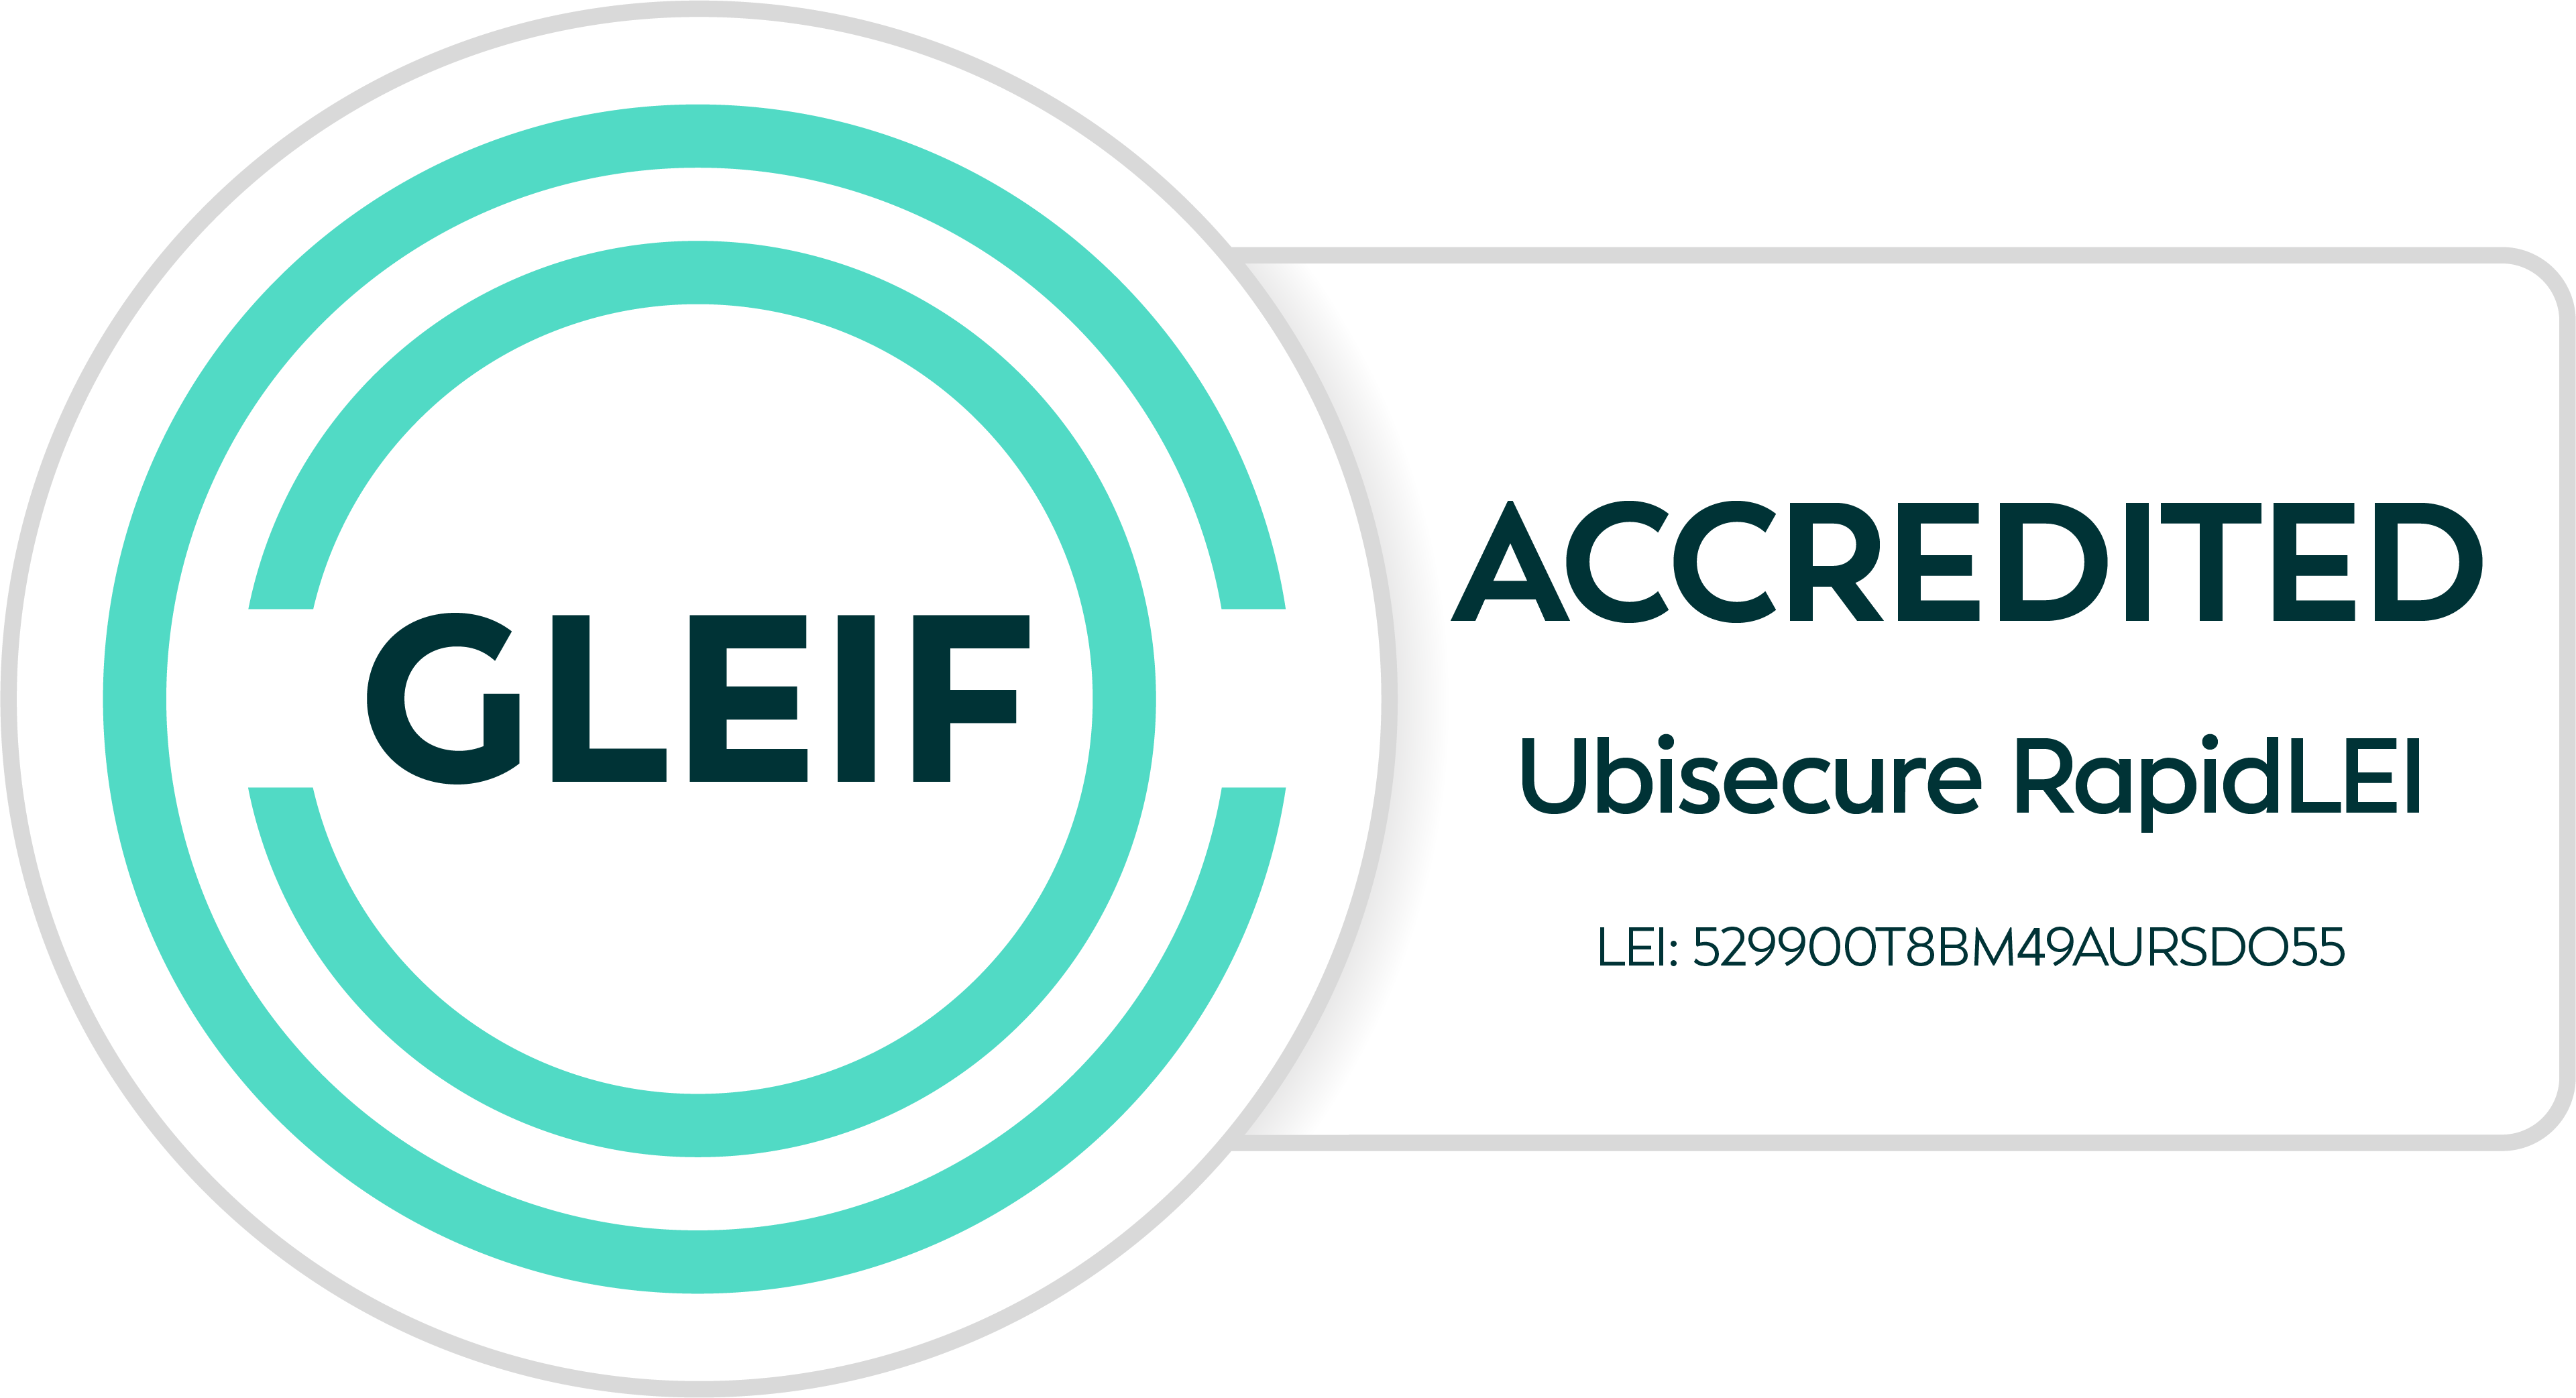 GLEIF Accredited